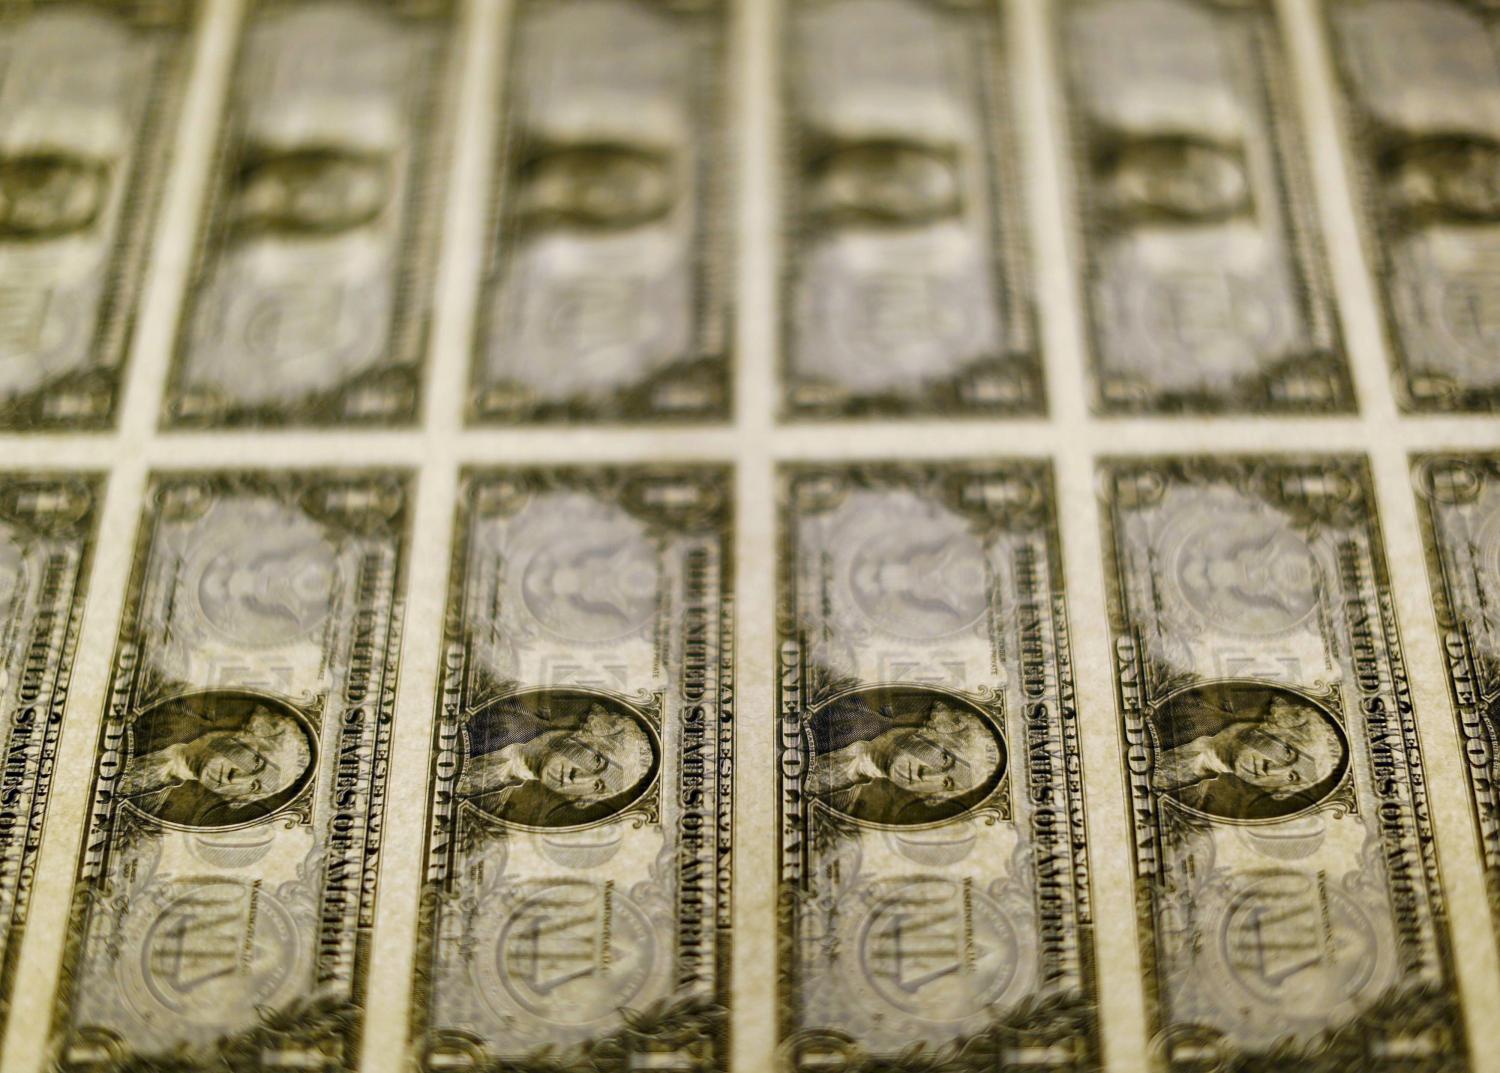 United States one dollar bills are seen on a light table at the Bureau of Engraving and Printing.